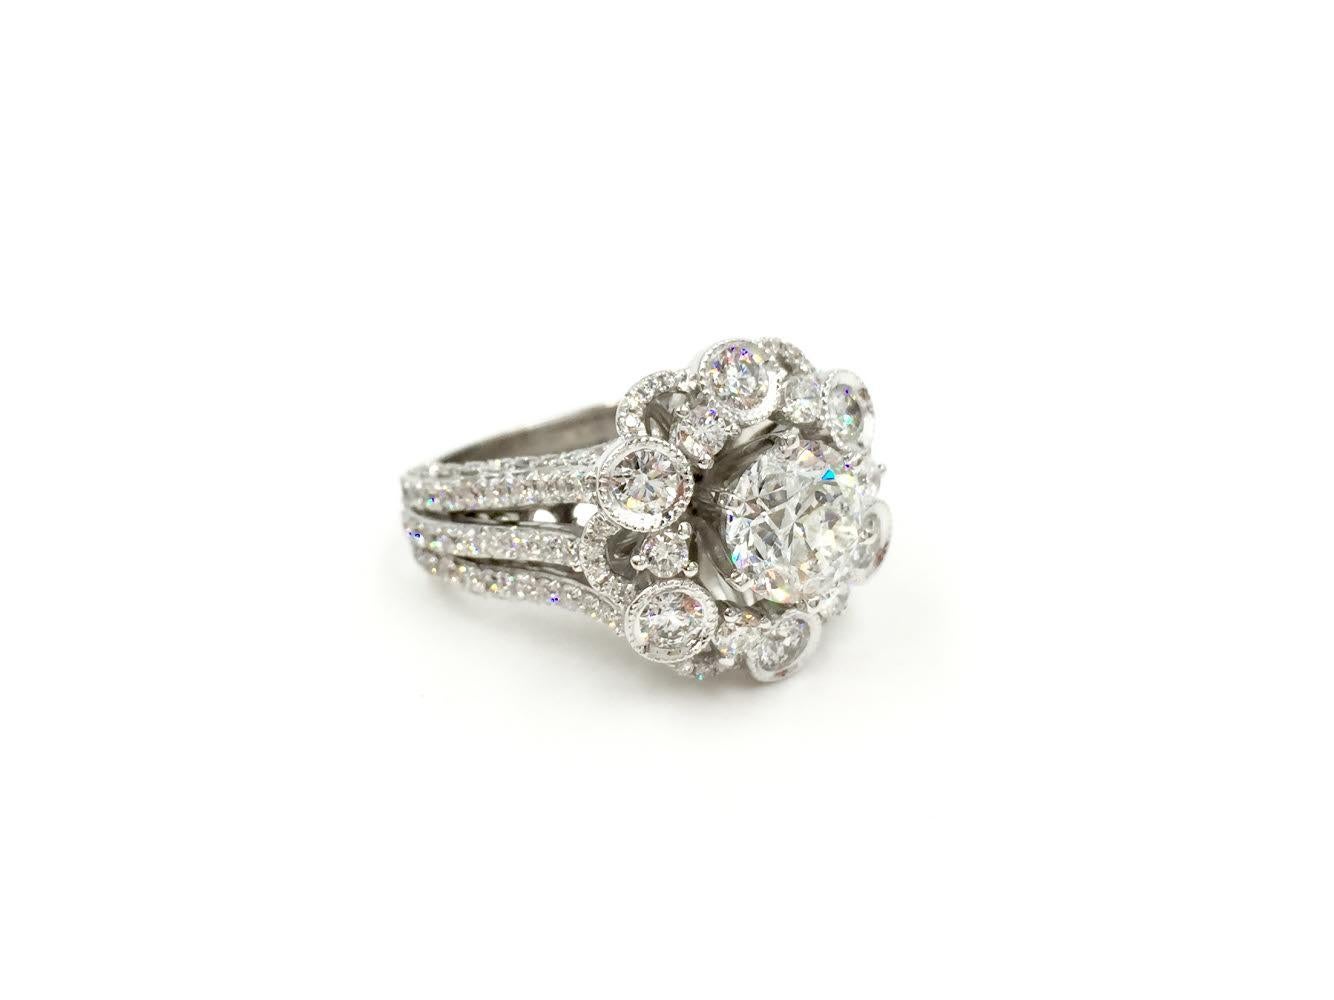 White Gold Diamond Halo Style Ring 3.67 Carat Total Weight In Good Condition For Sale In Pikesville, MD